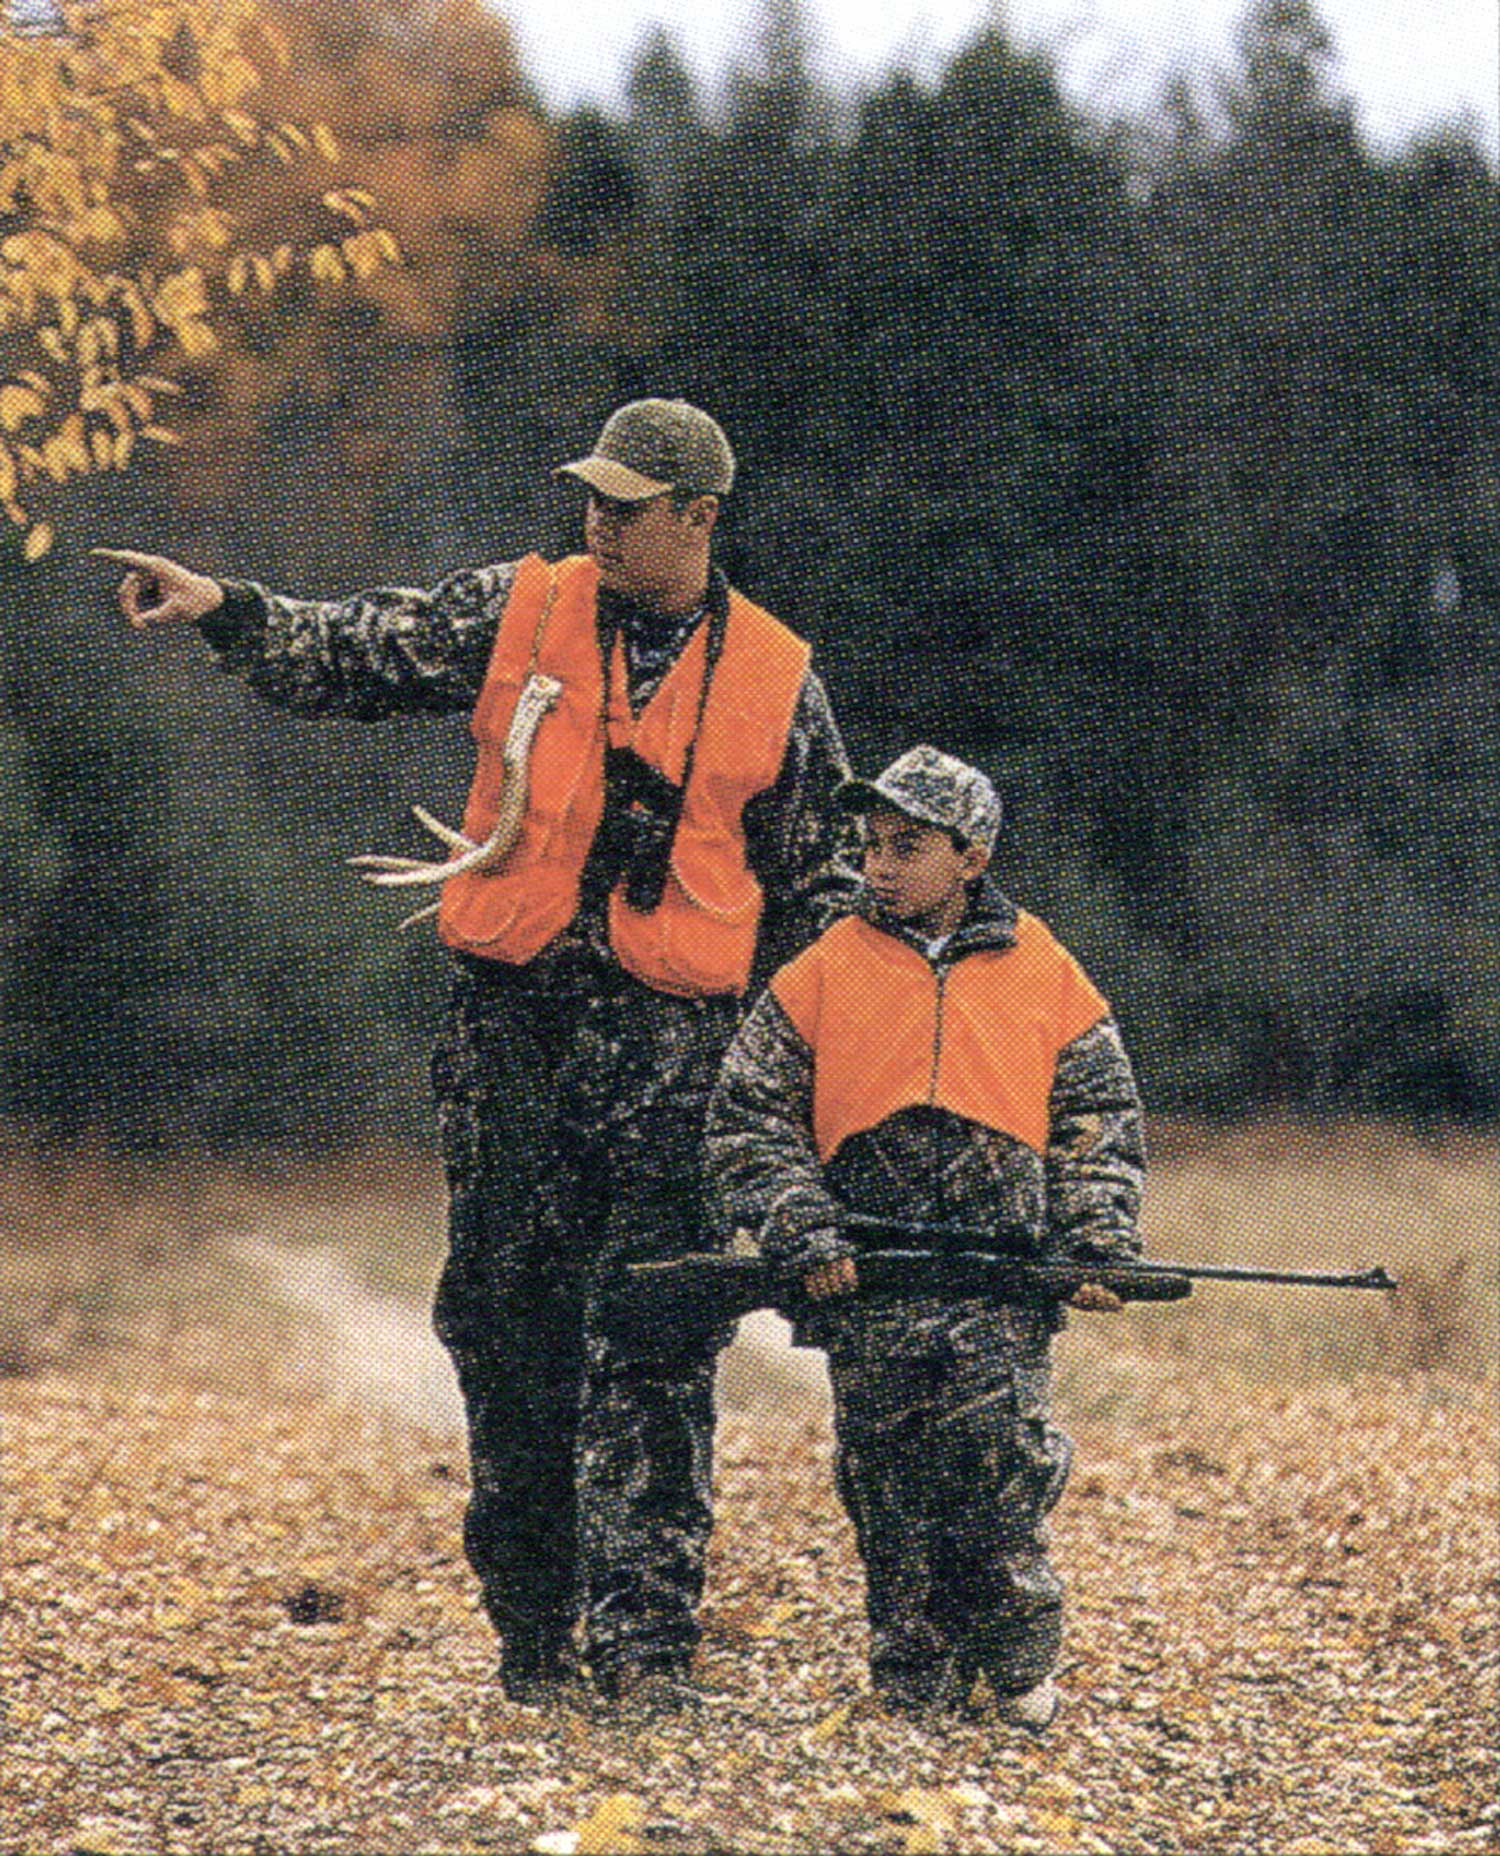 two hunters in orange vests: grown man carrying binoculars and rattling antlers walks beside young hunter with rifle